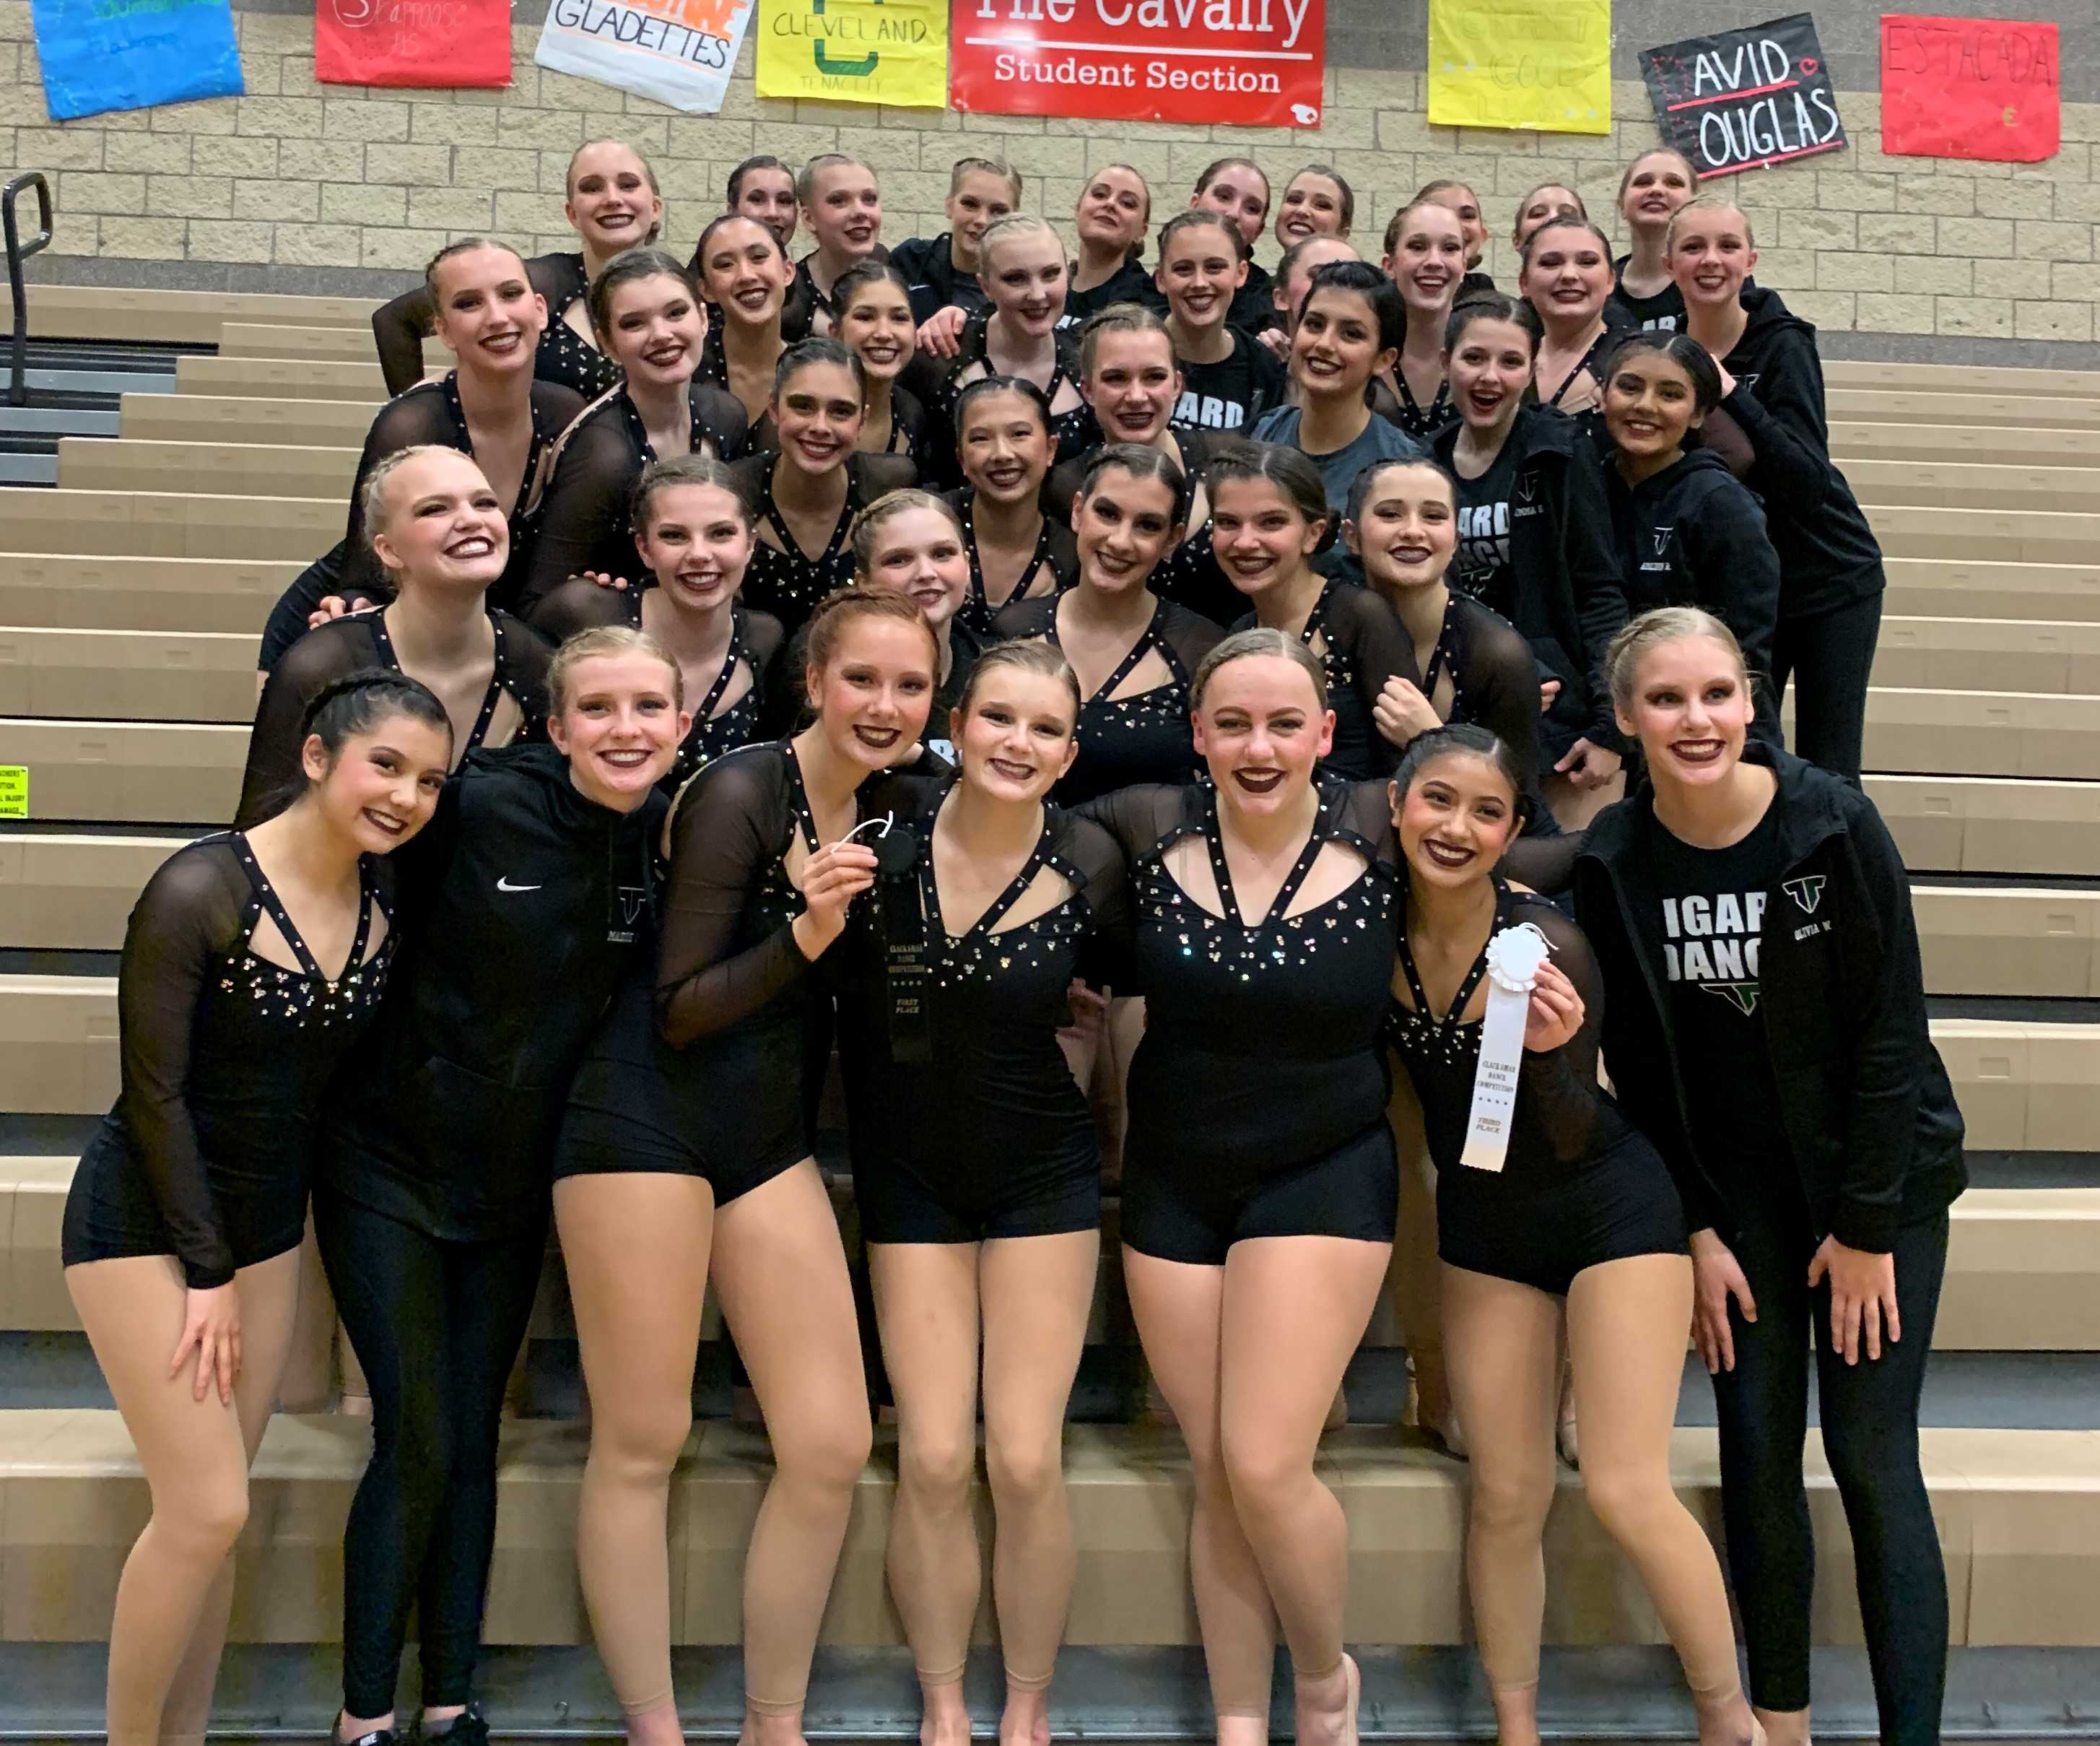 The Tigard Tigerettes had three first place finishes and overall high score at the Clackamas Competition.